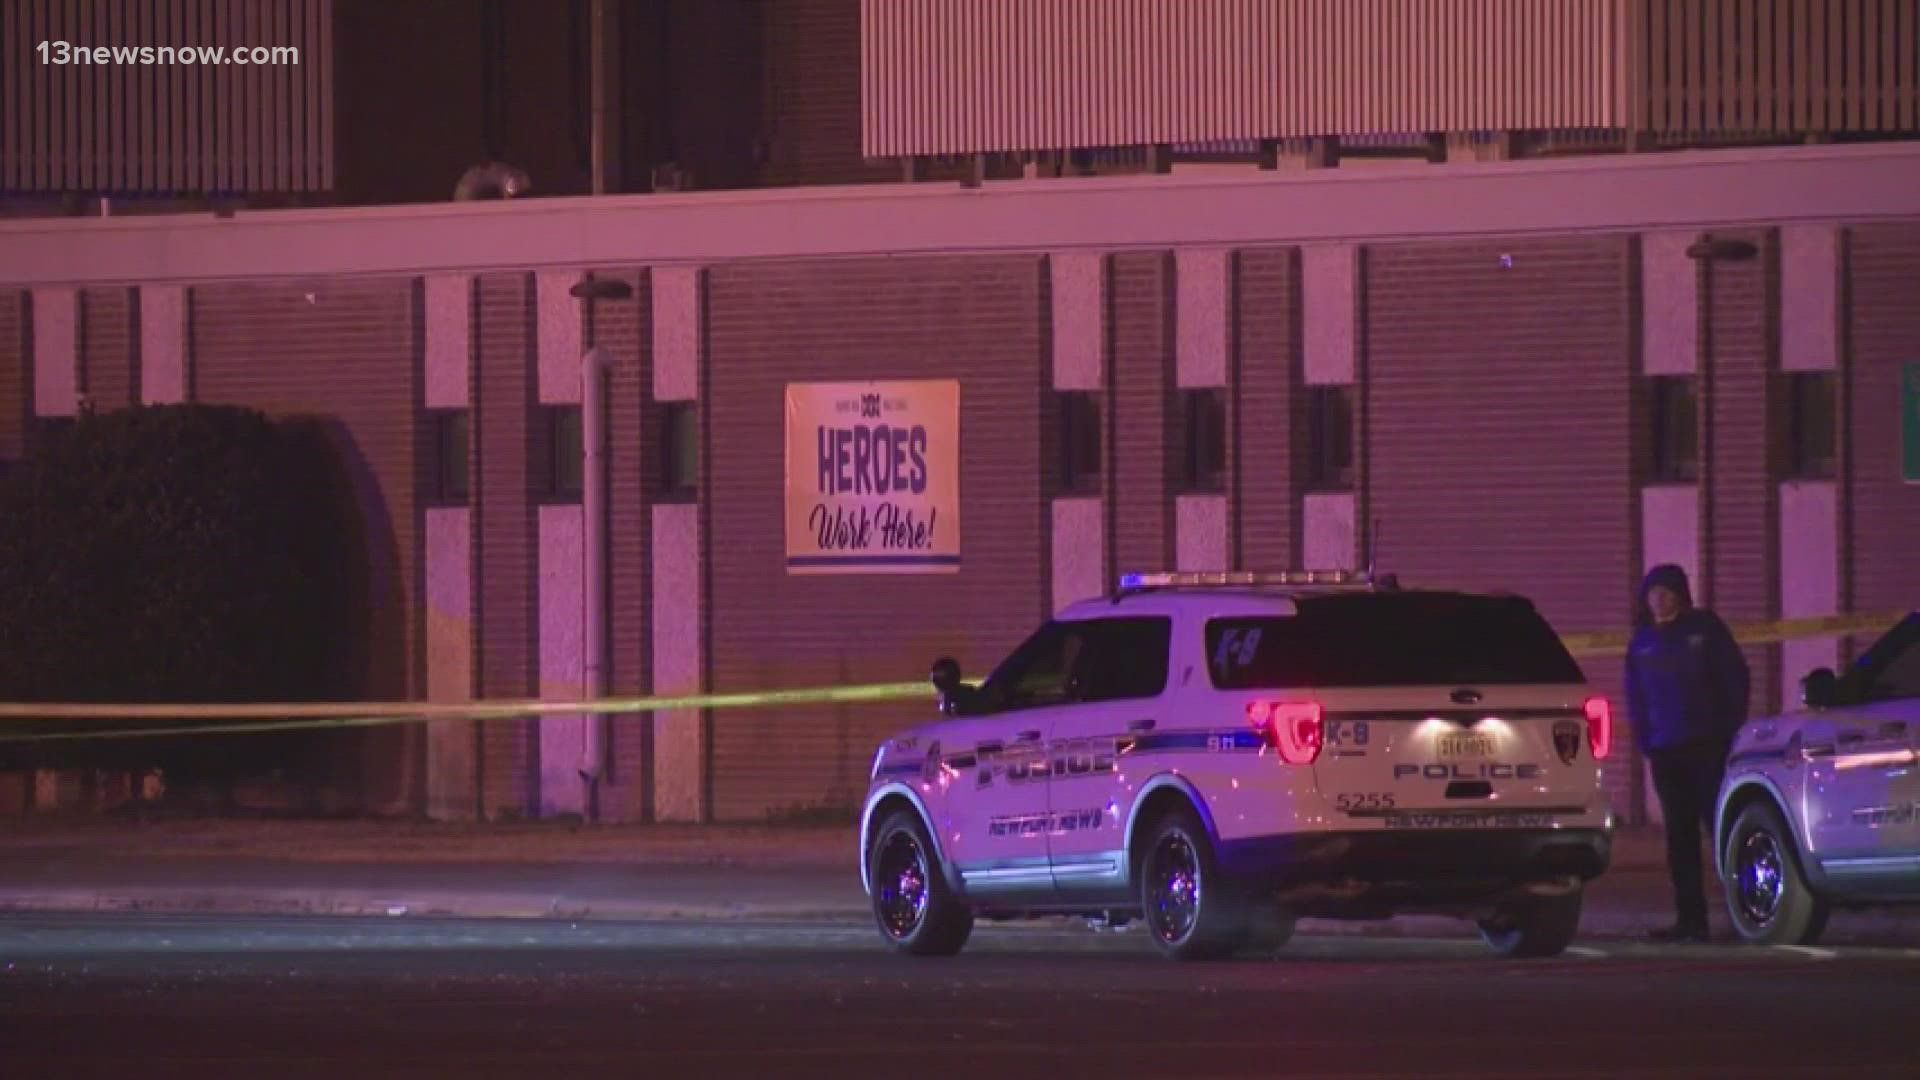 A teenage boy was shot and killed in the parking lot of Menchville High School Tuesday night. Classes at Menchville and Woodside high schools were canceled.